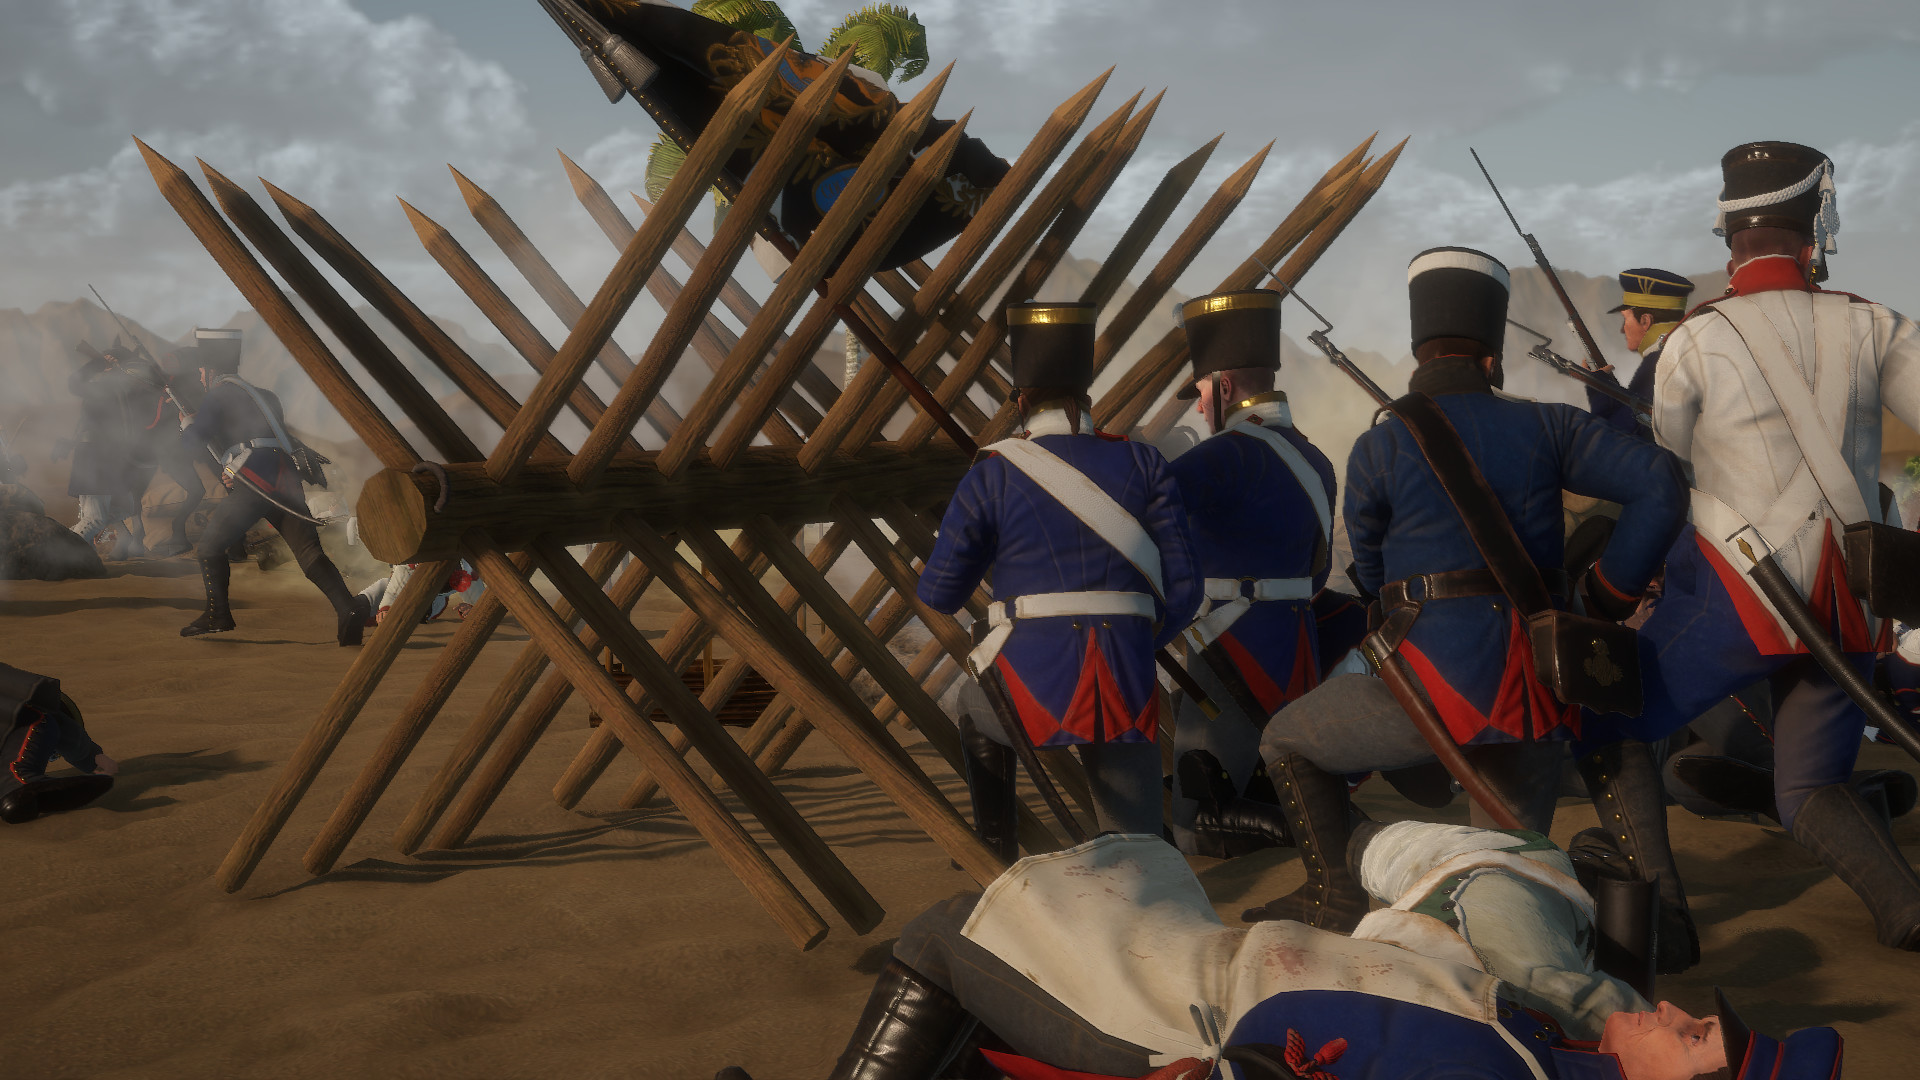 Holdfast: Nations At War on Steam